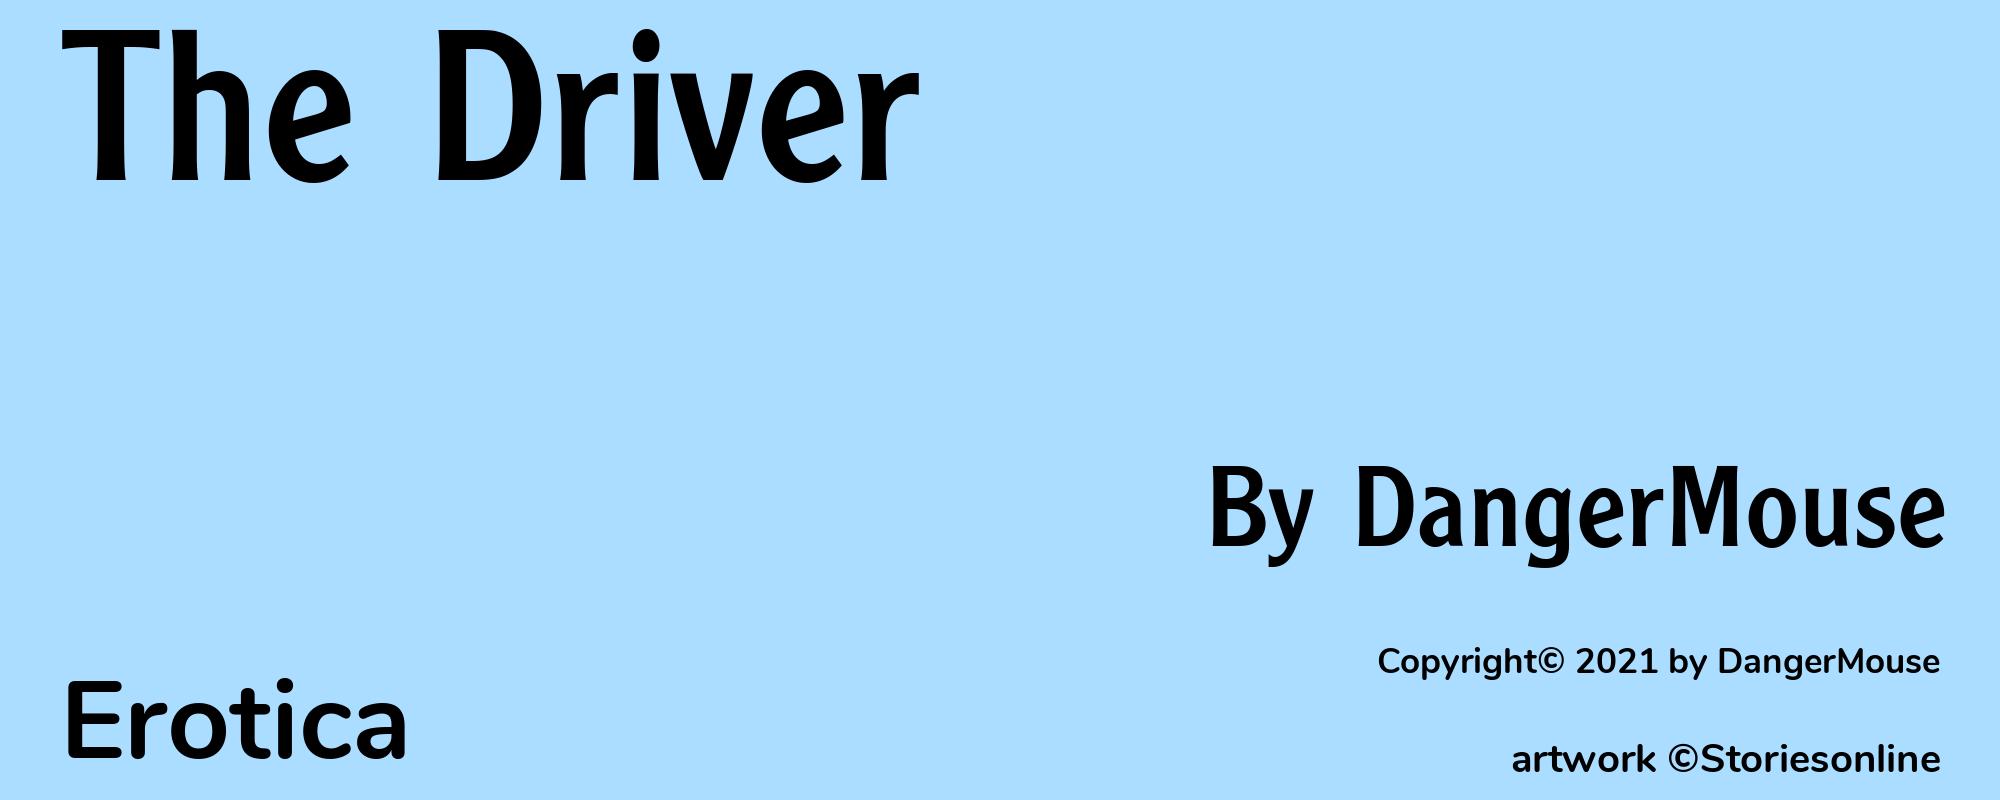 The Driver - Cover